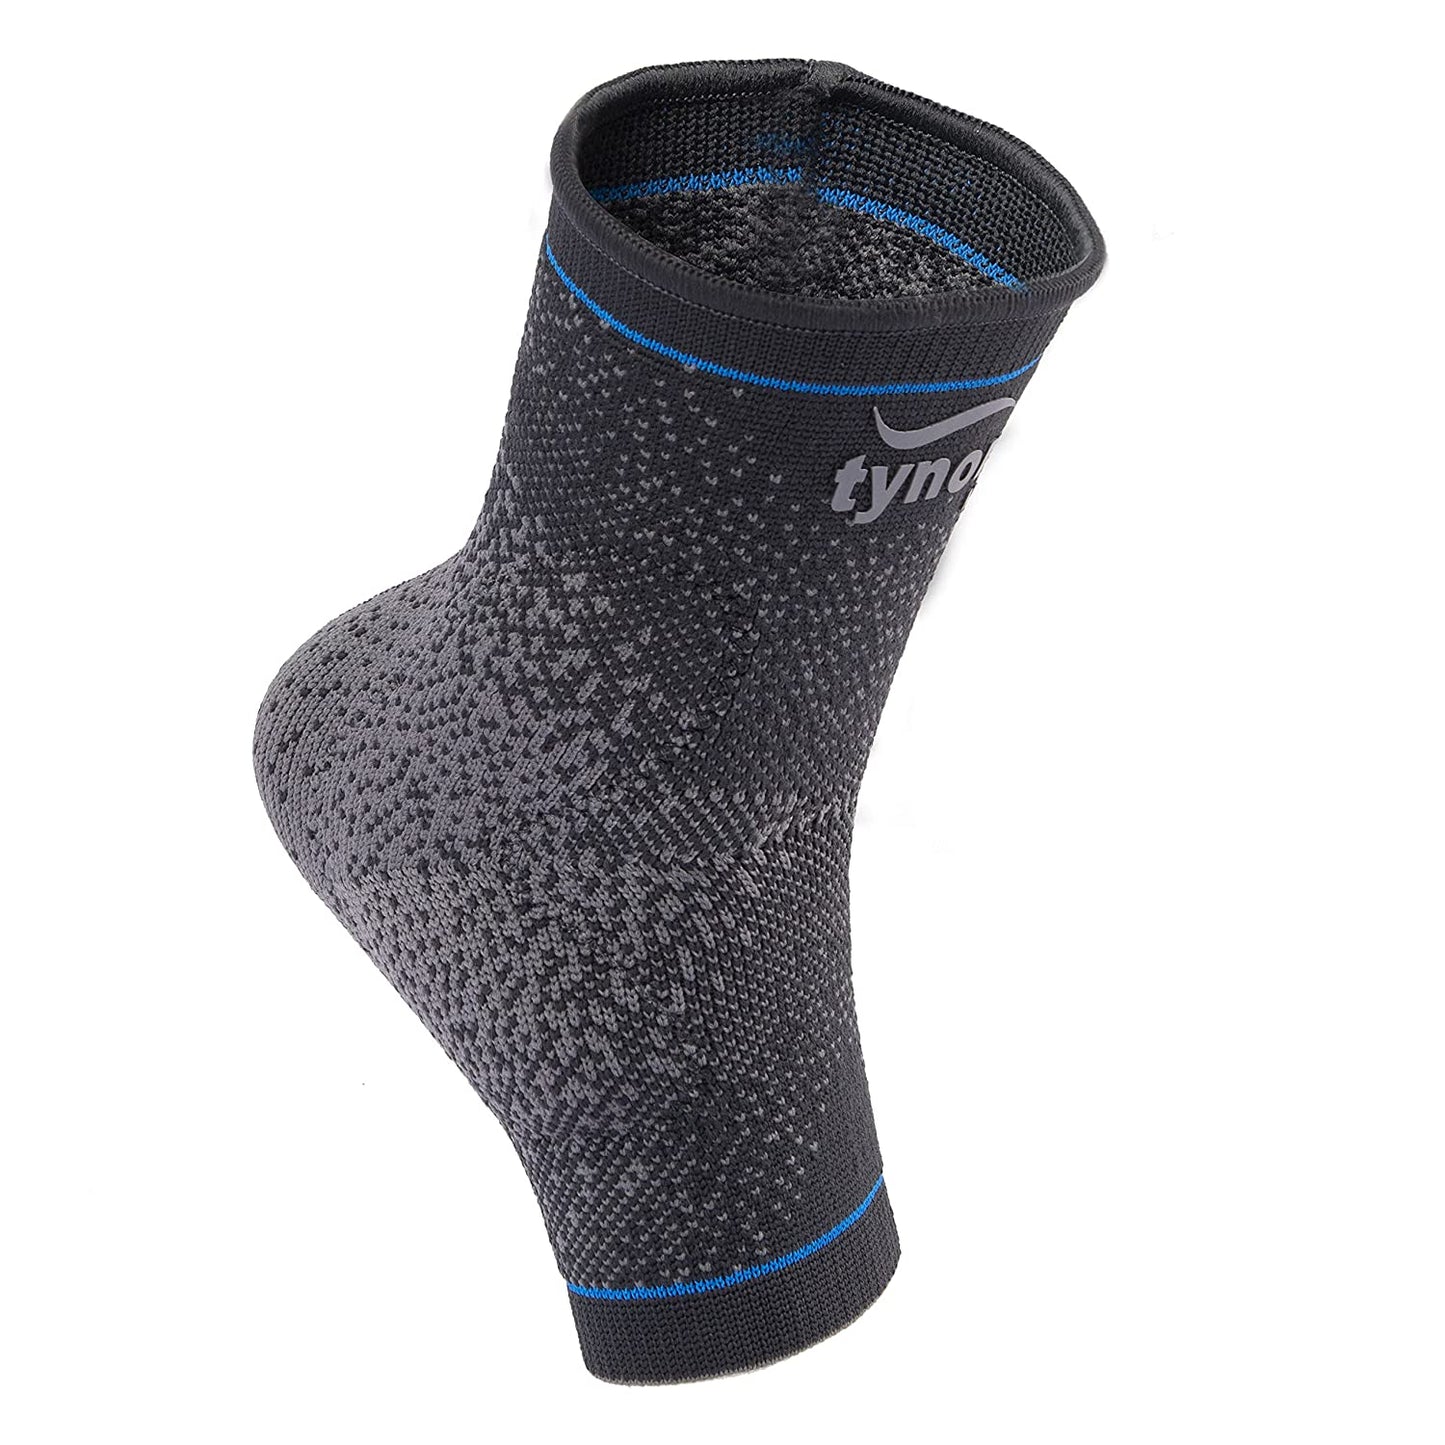 Tynor Ankle Support Urbane Grey,1 Unit Ankle Support